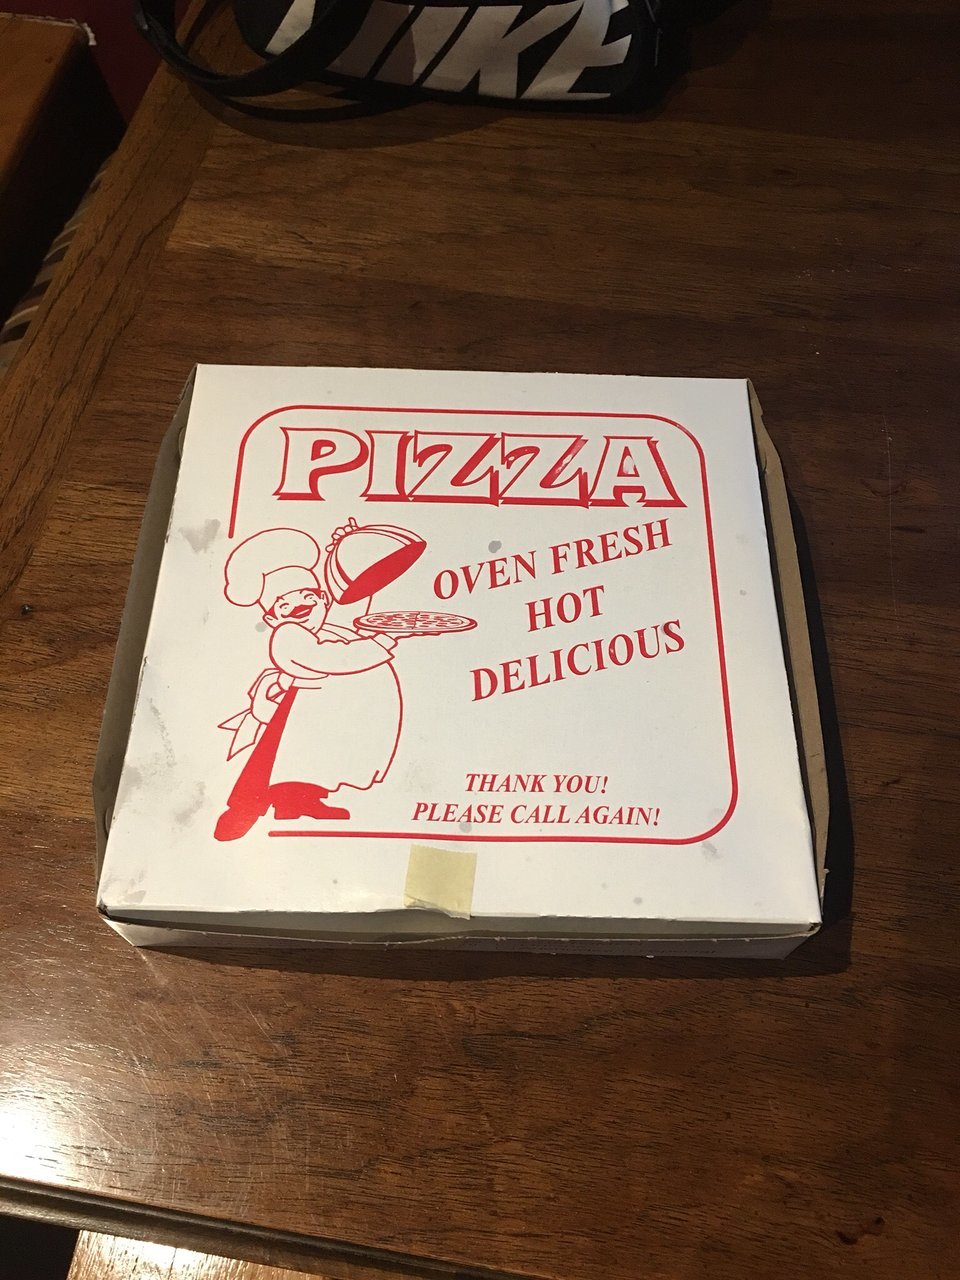 Beverly Pizza House